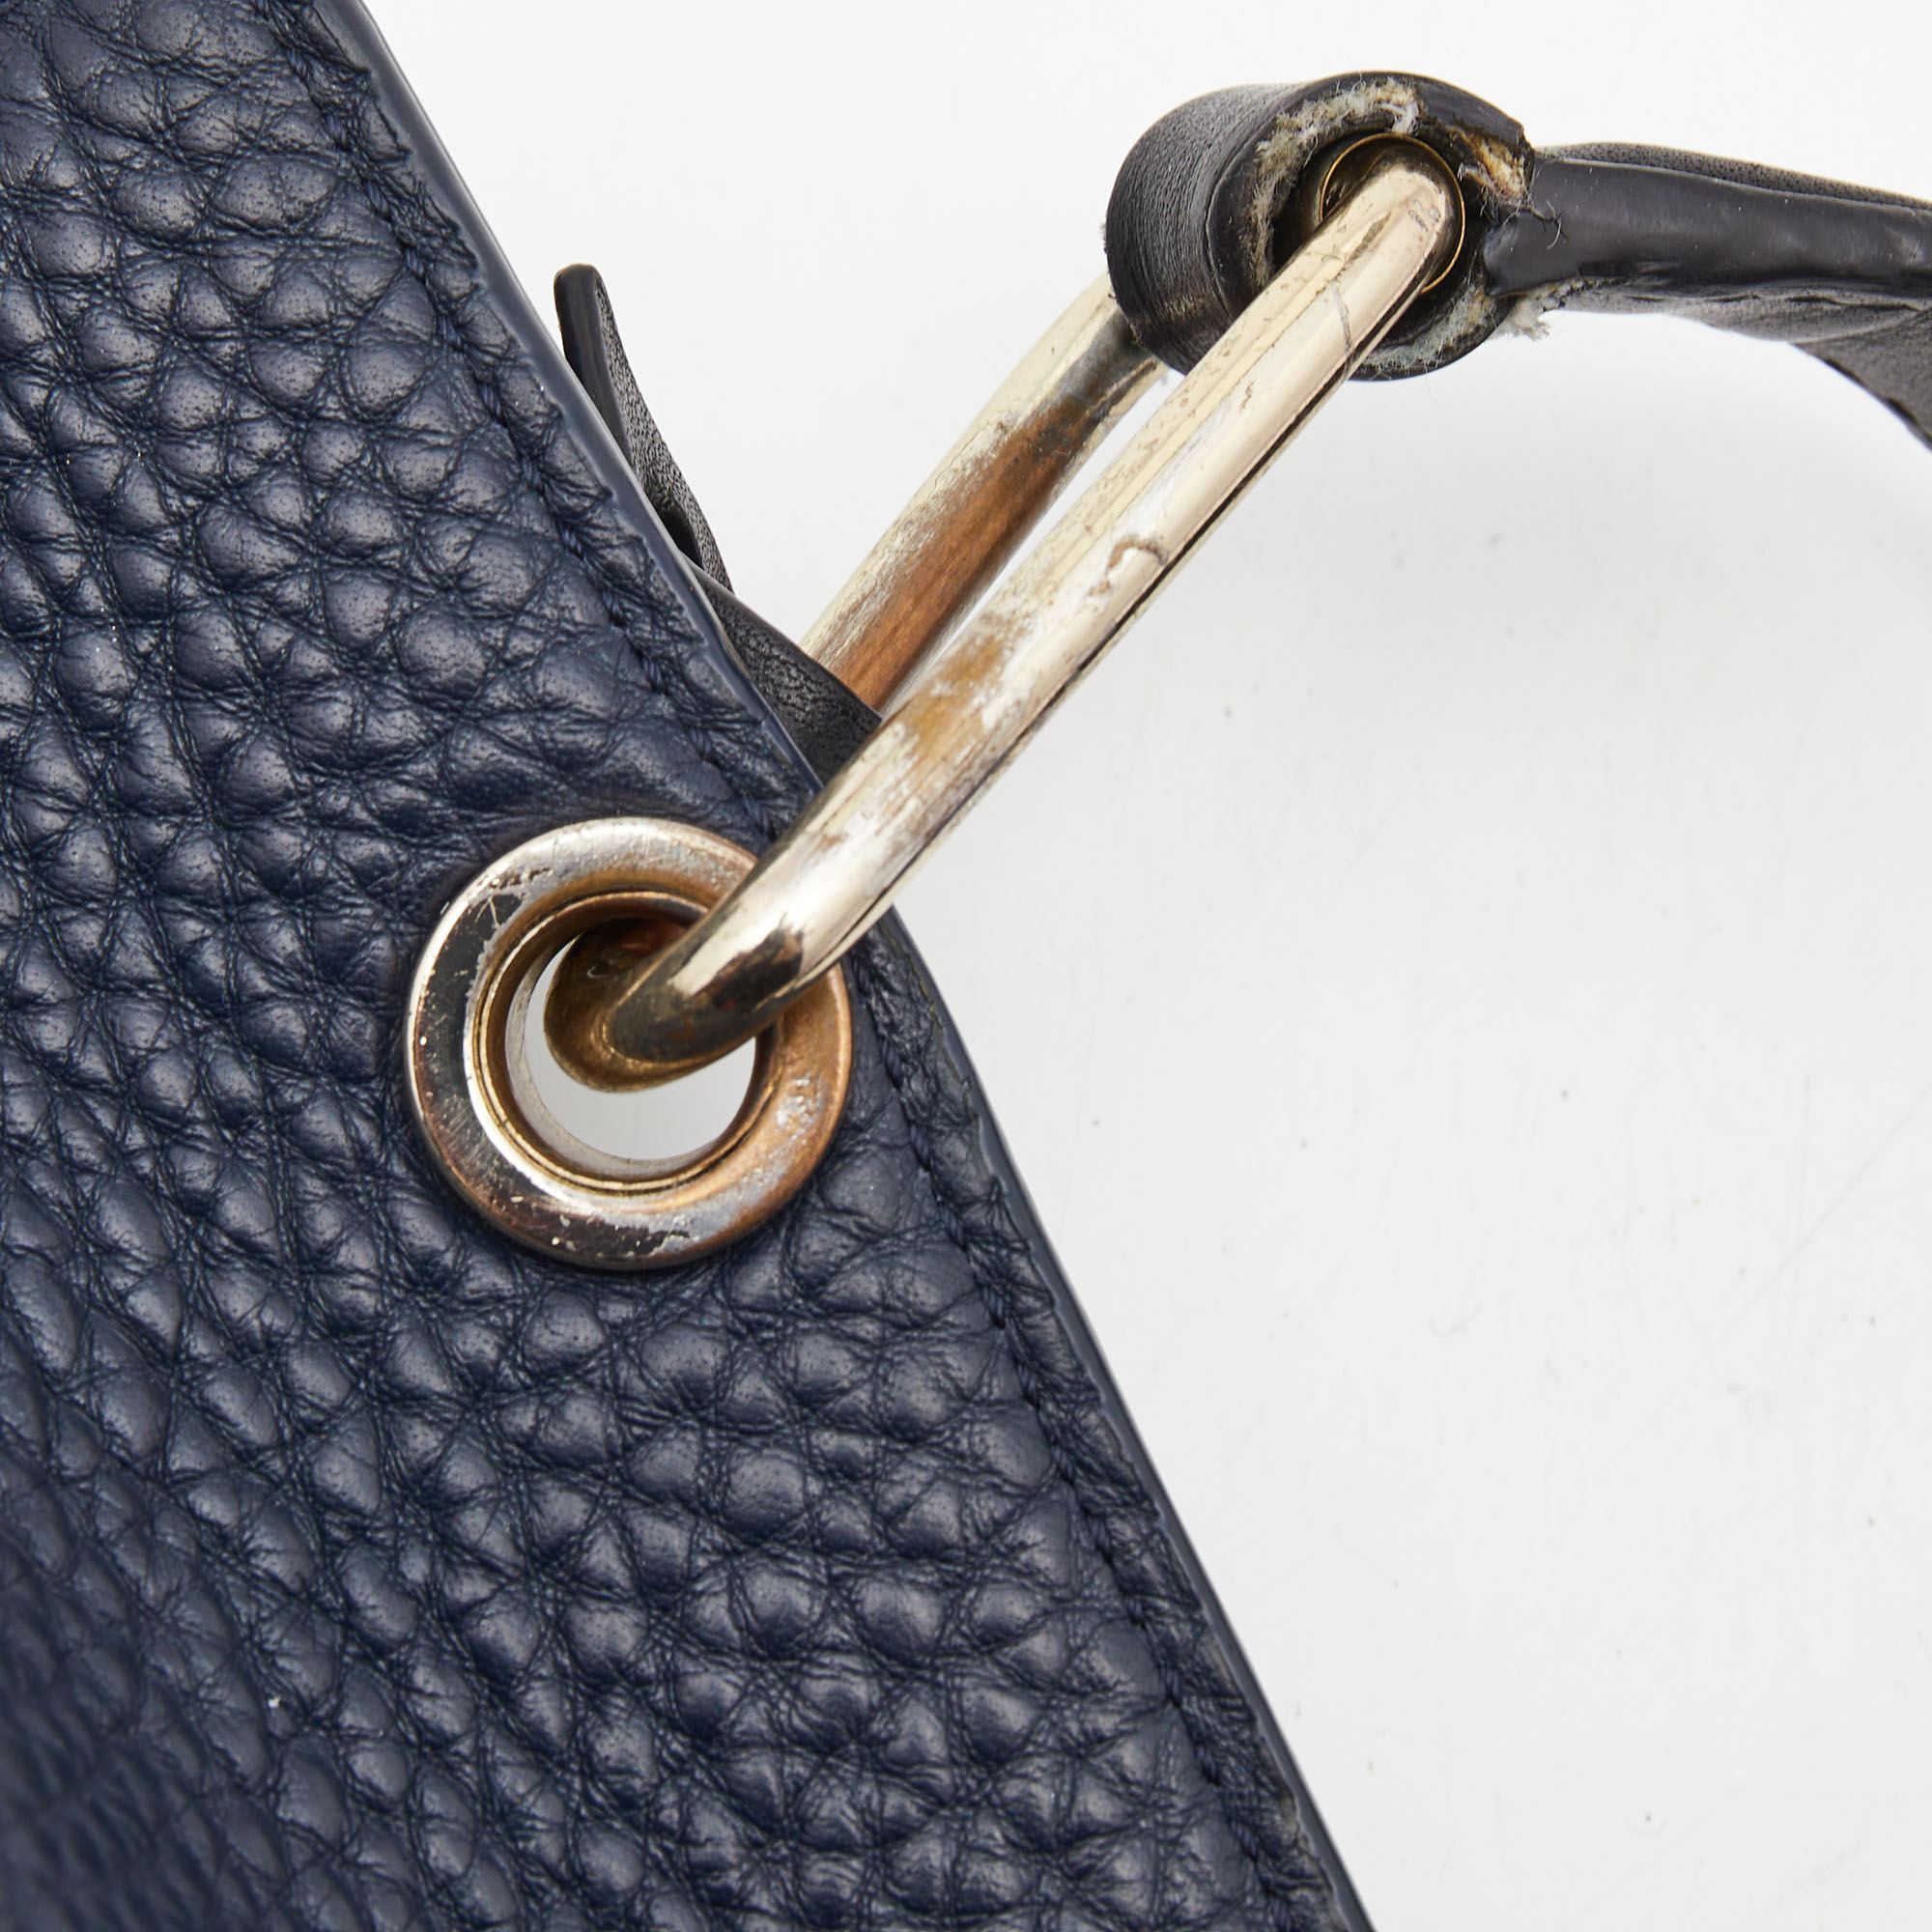 Dkny Navy Blue Leather Greenwich Top Handle Bag